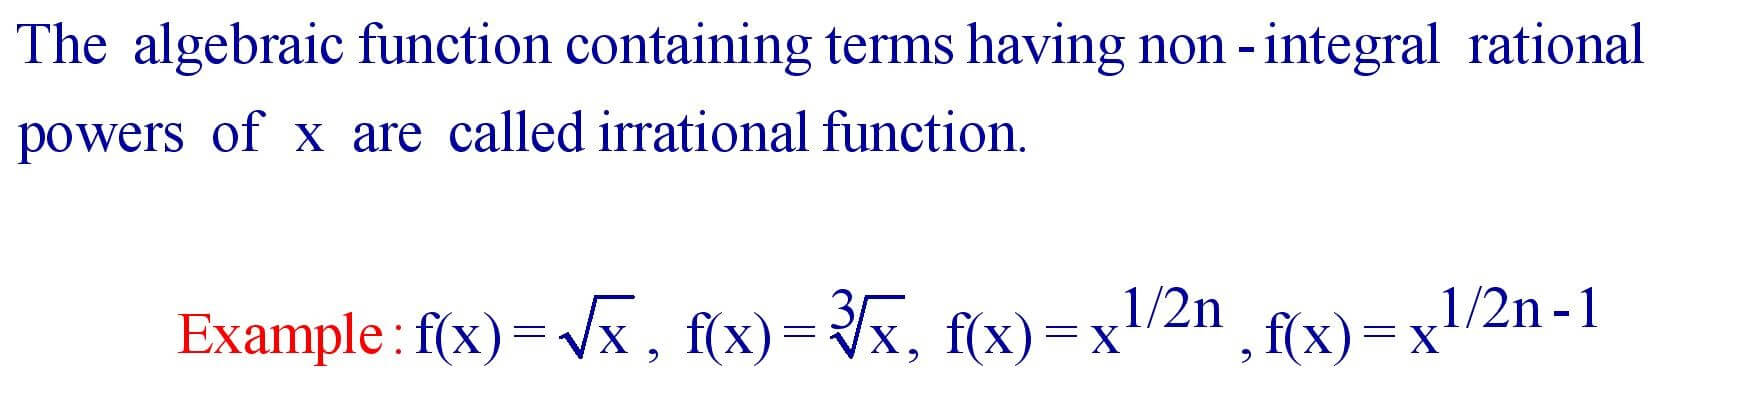 Irrational Function